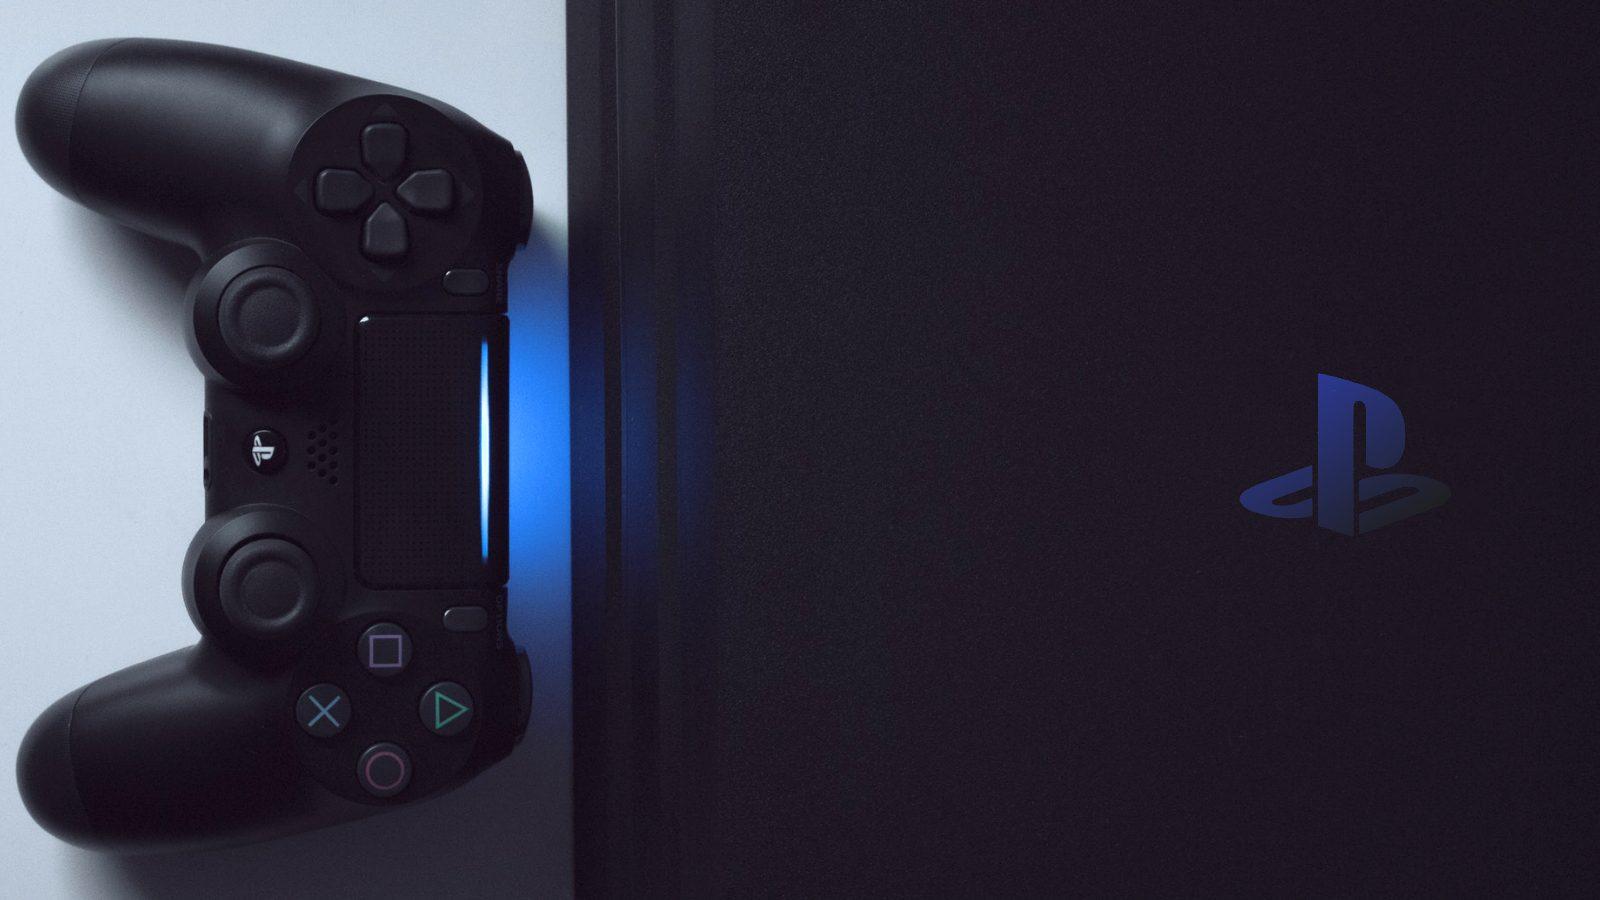 PlayStation Portal Remote Play PS5 Game Streaming Console Specs And Pricing  Revealed